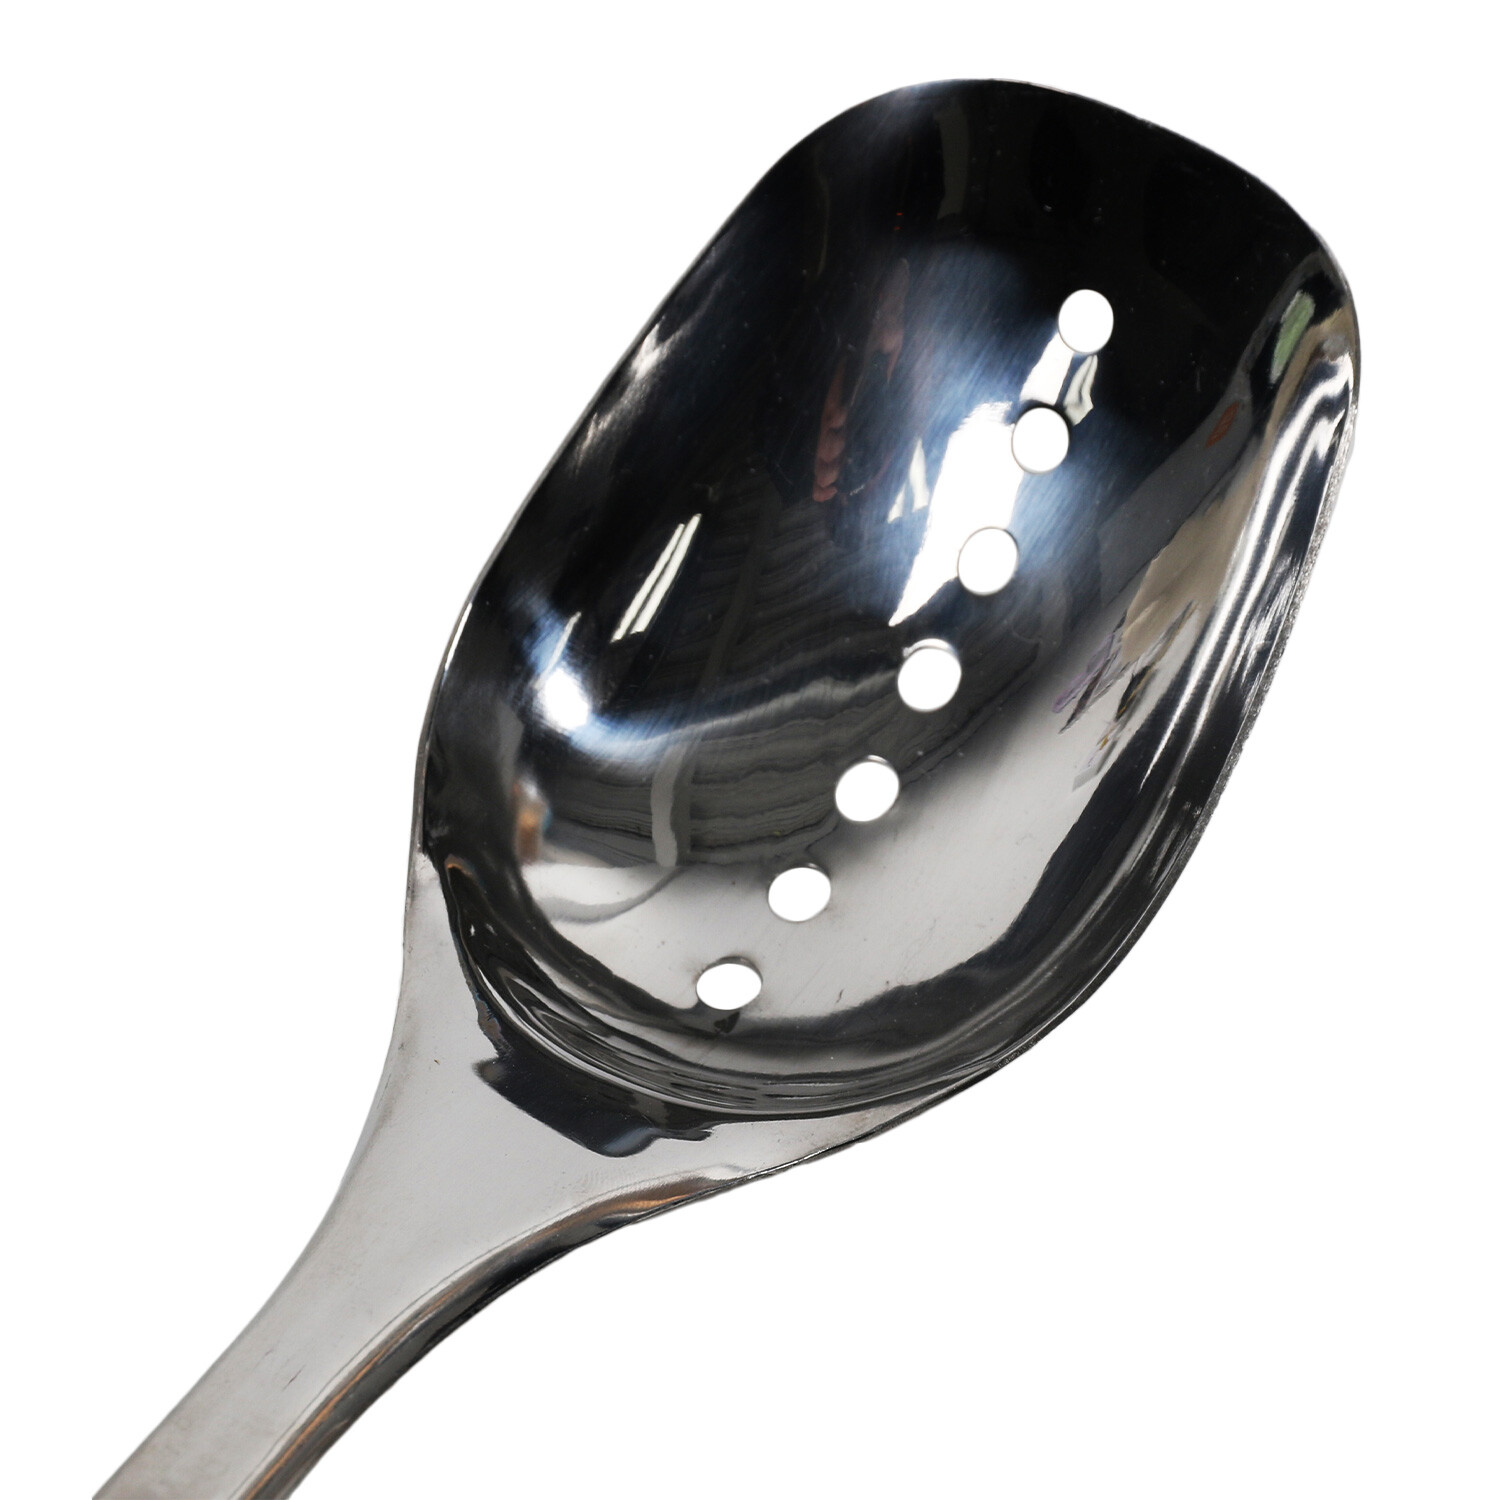 Stainless Steel Slotted Spoon with Soft Touch Handle - Grey Image 2